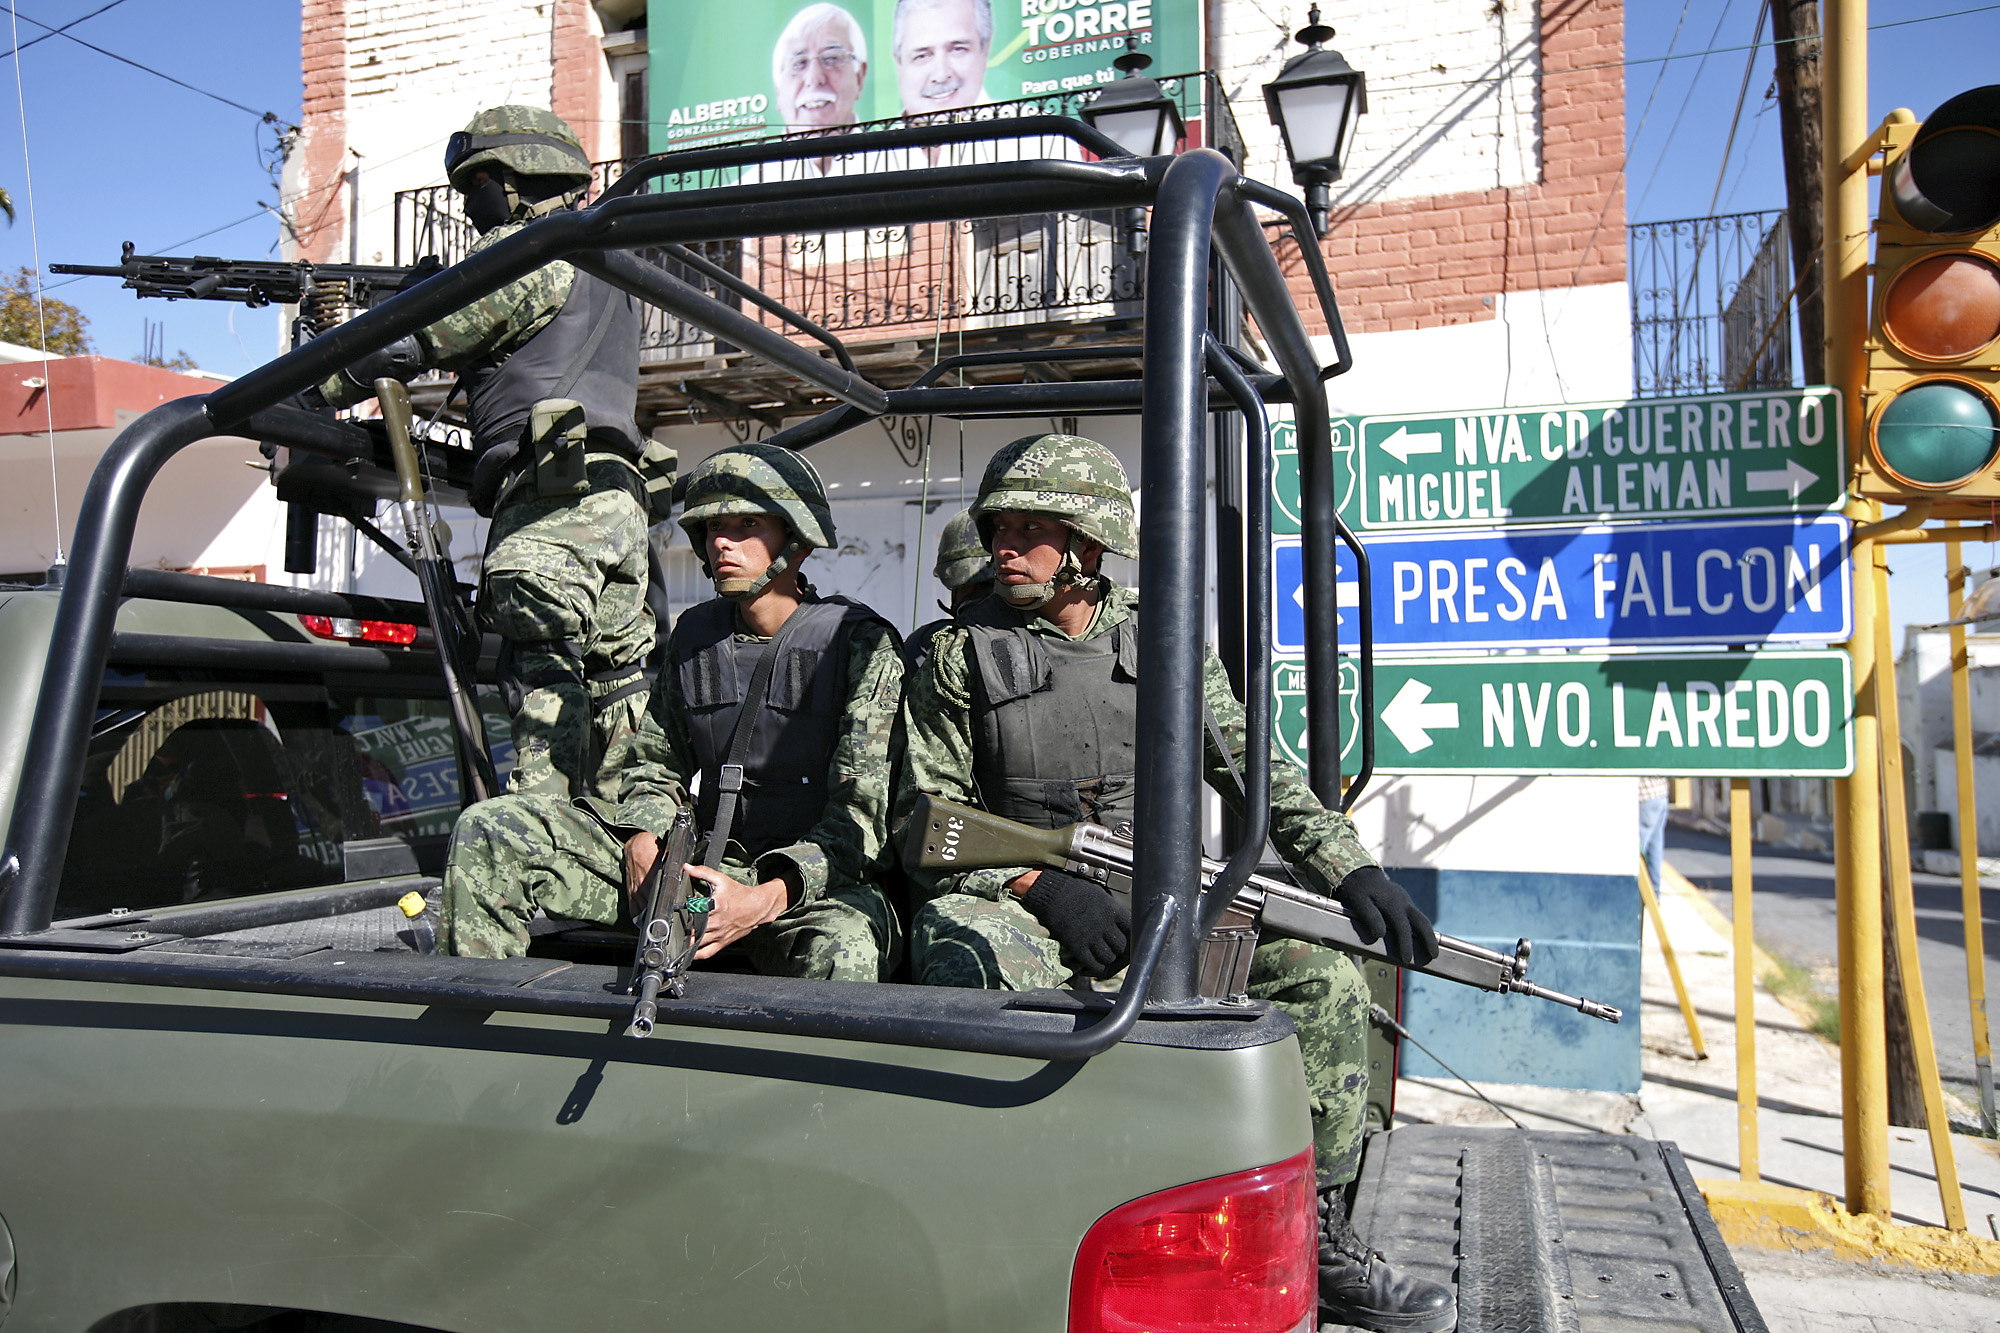 In Ciudad Mier, deploying troops is not enough